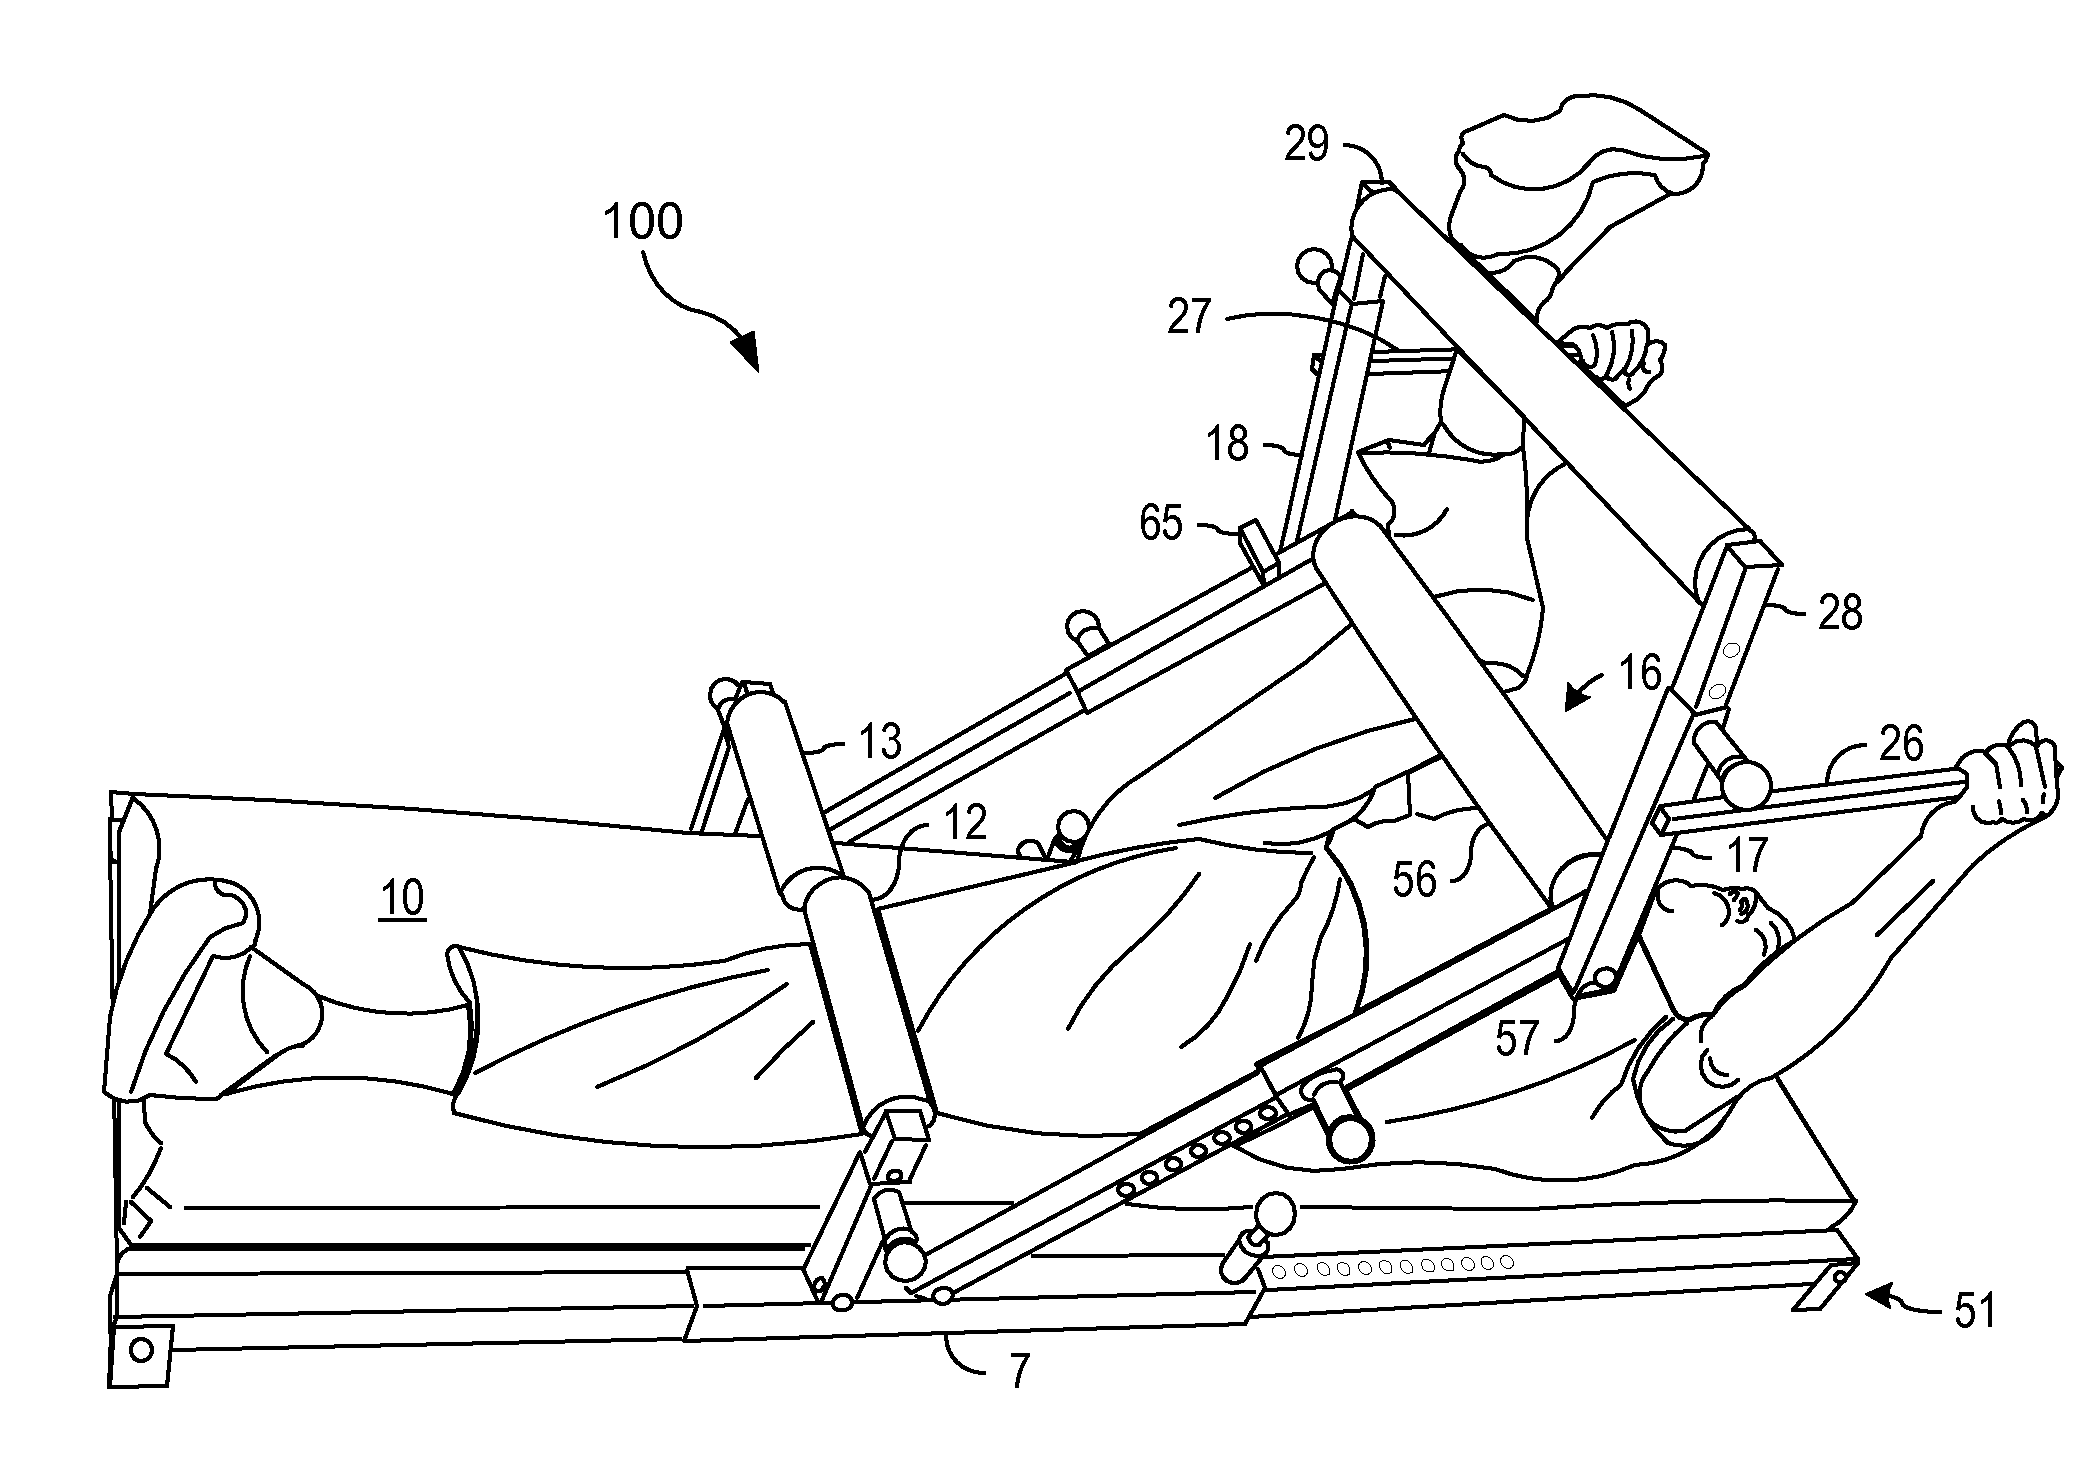 Stretching and conditioning apparatus